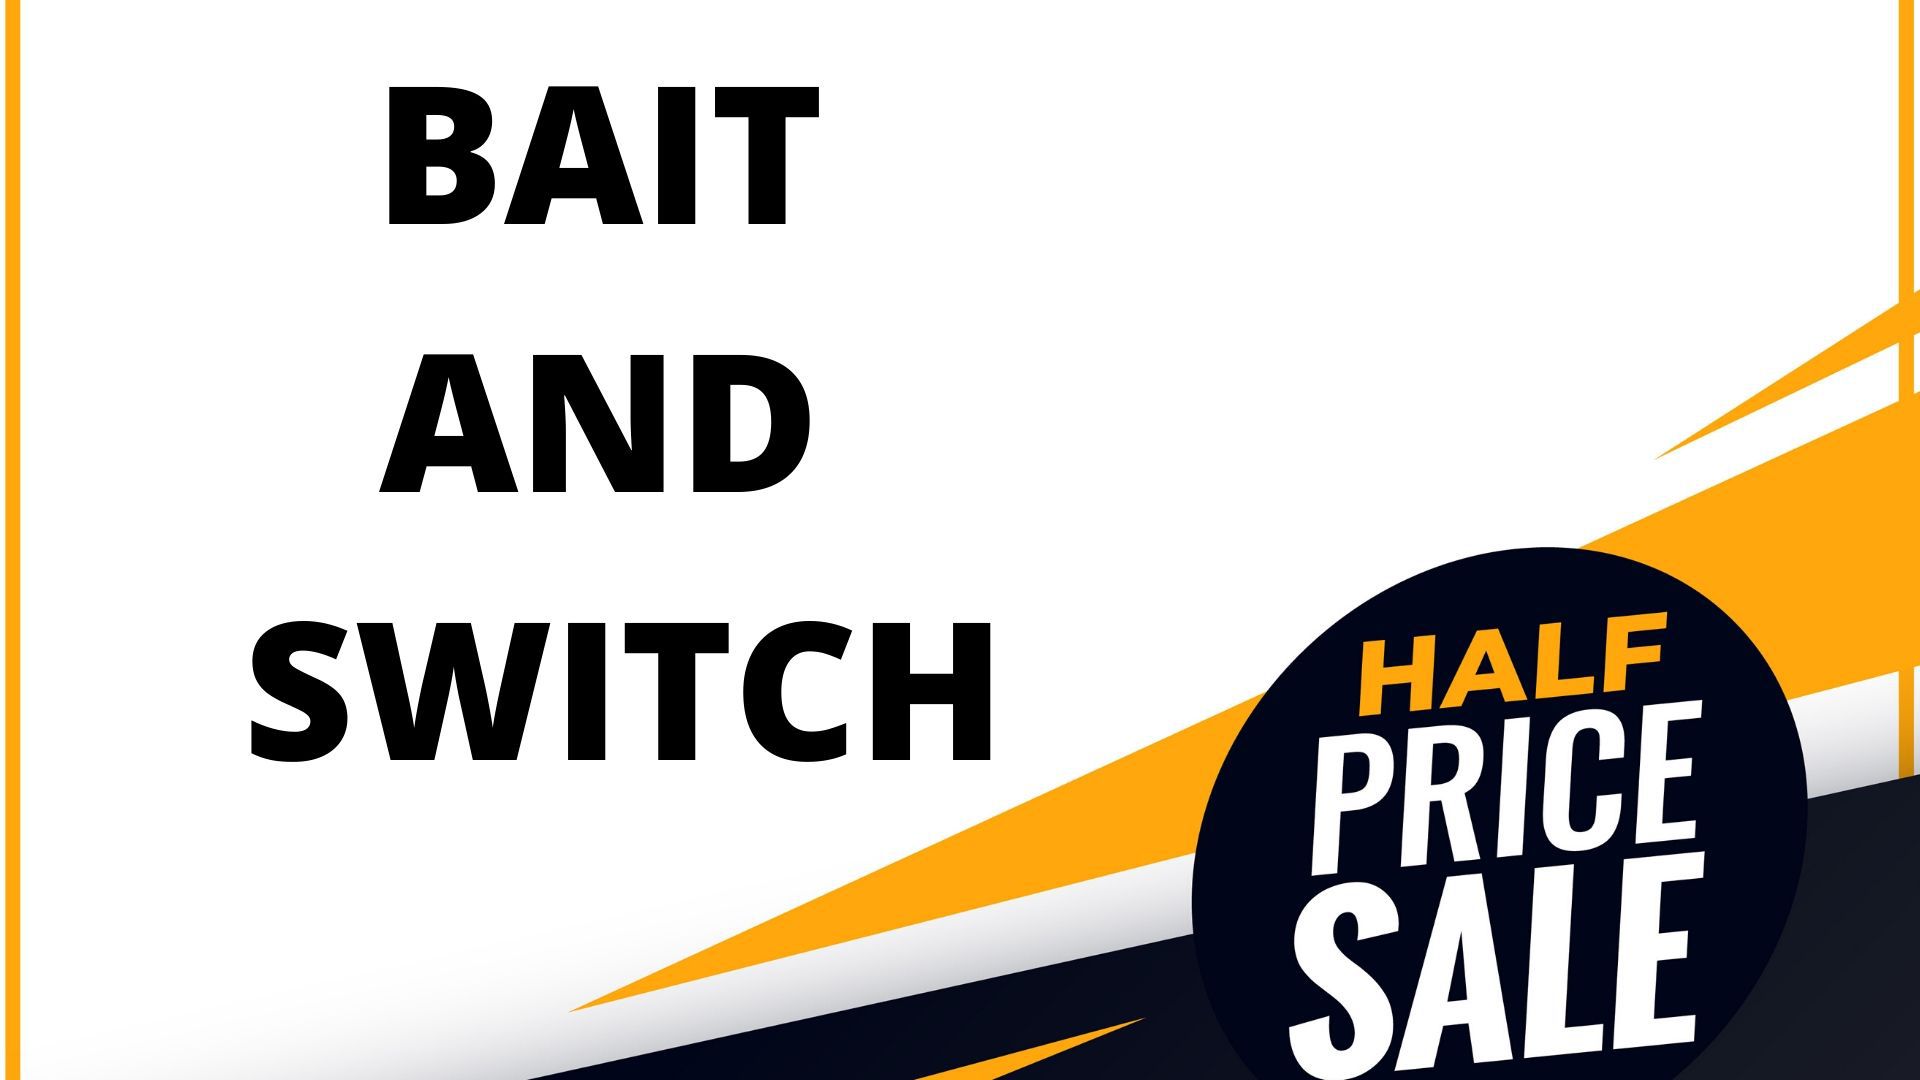 Bait and switch Definition, Signs of Bait and Switch scams